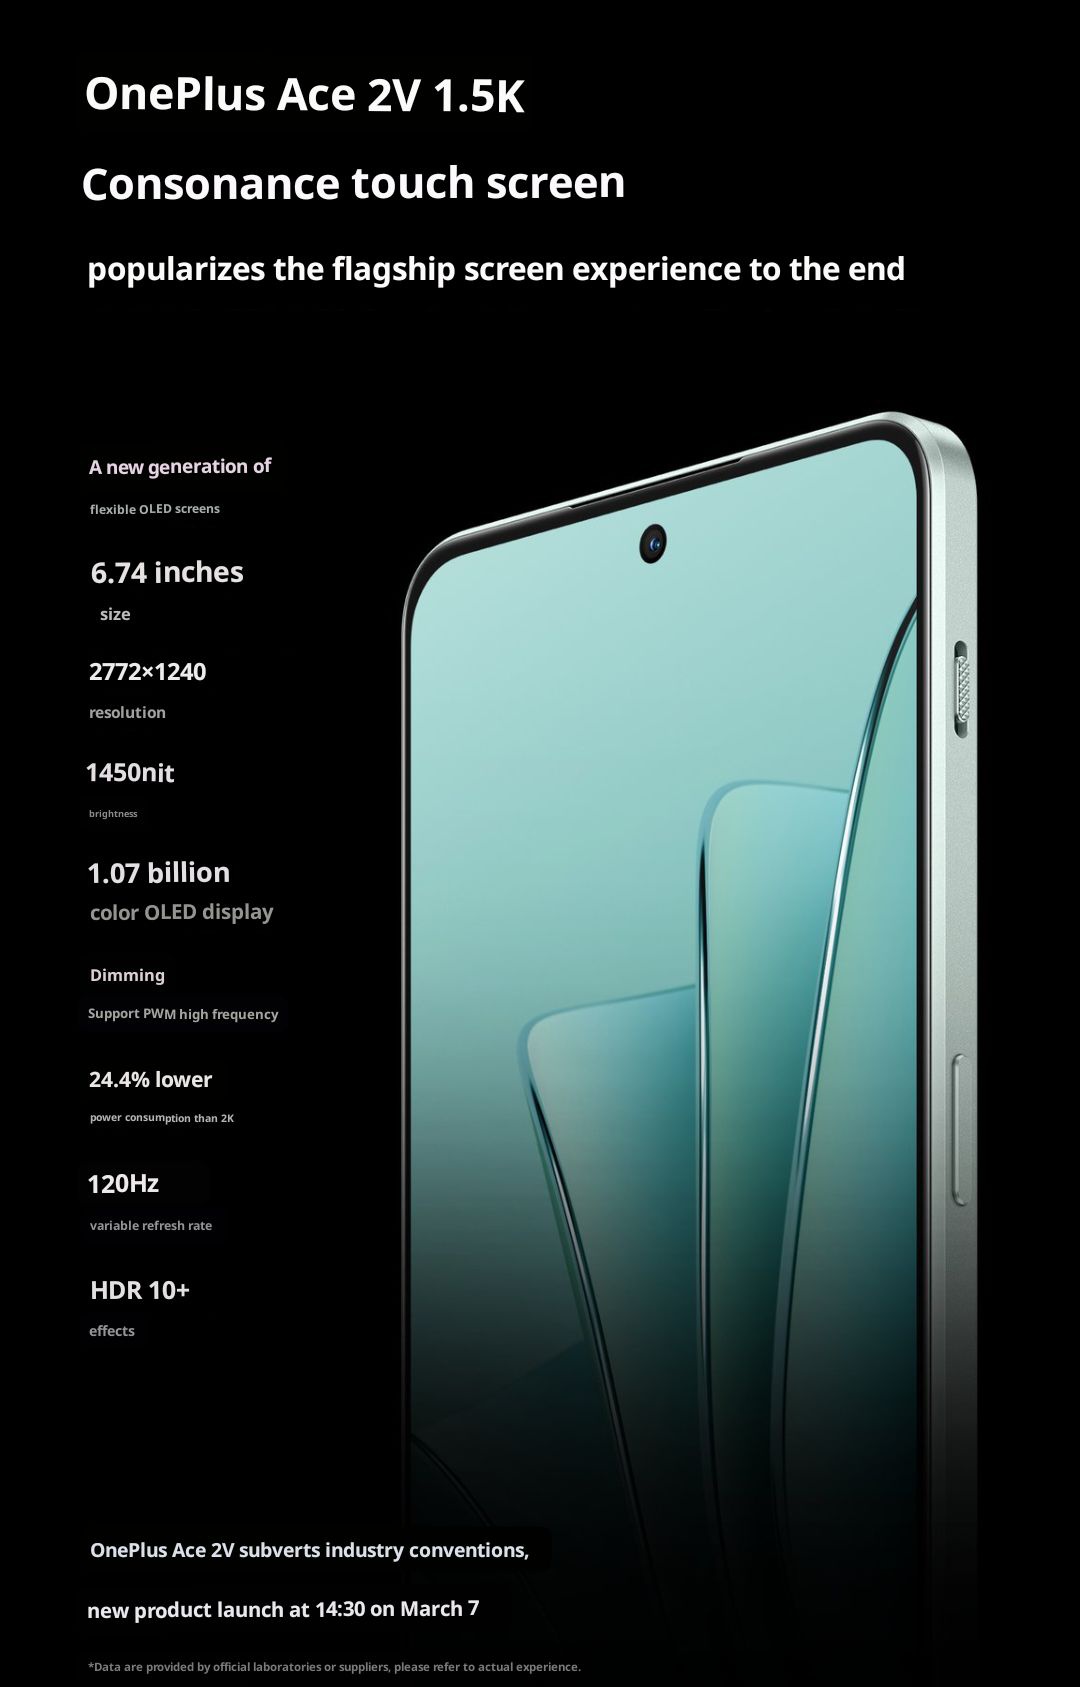 Nubia Z50S Pro launched with 6.78-inch 1.5K 120Hz AMOLED display